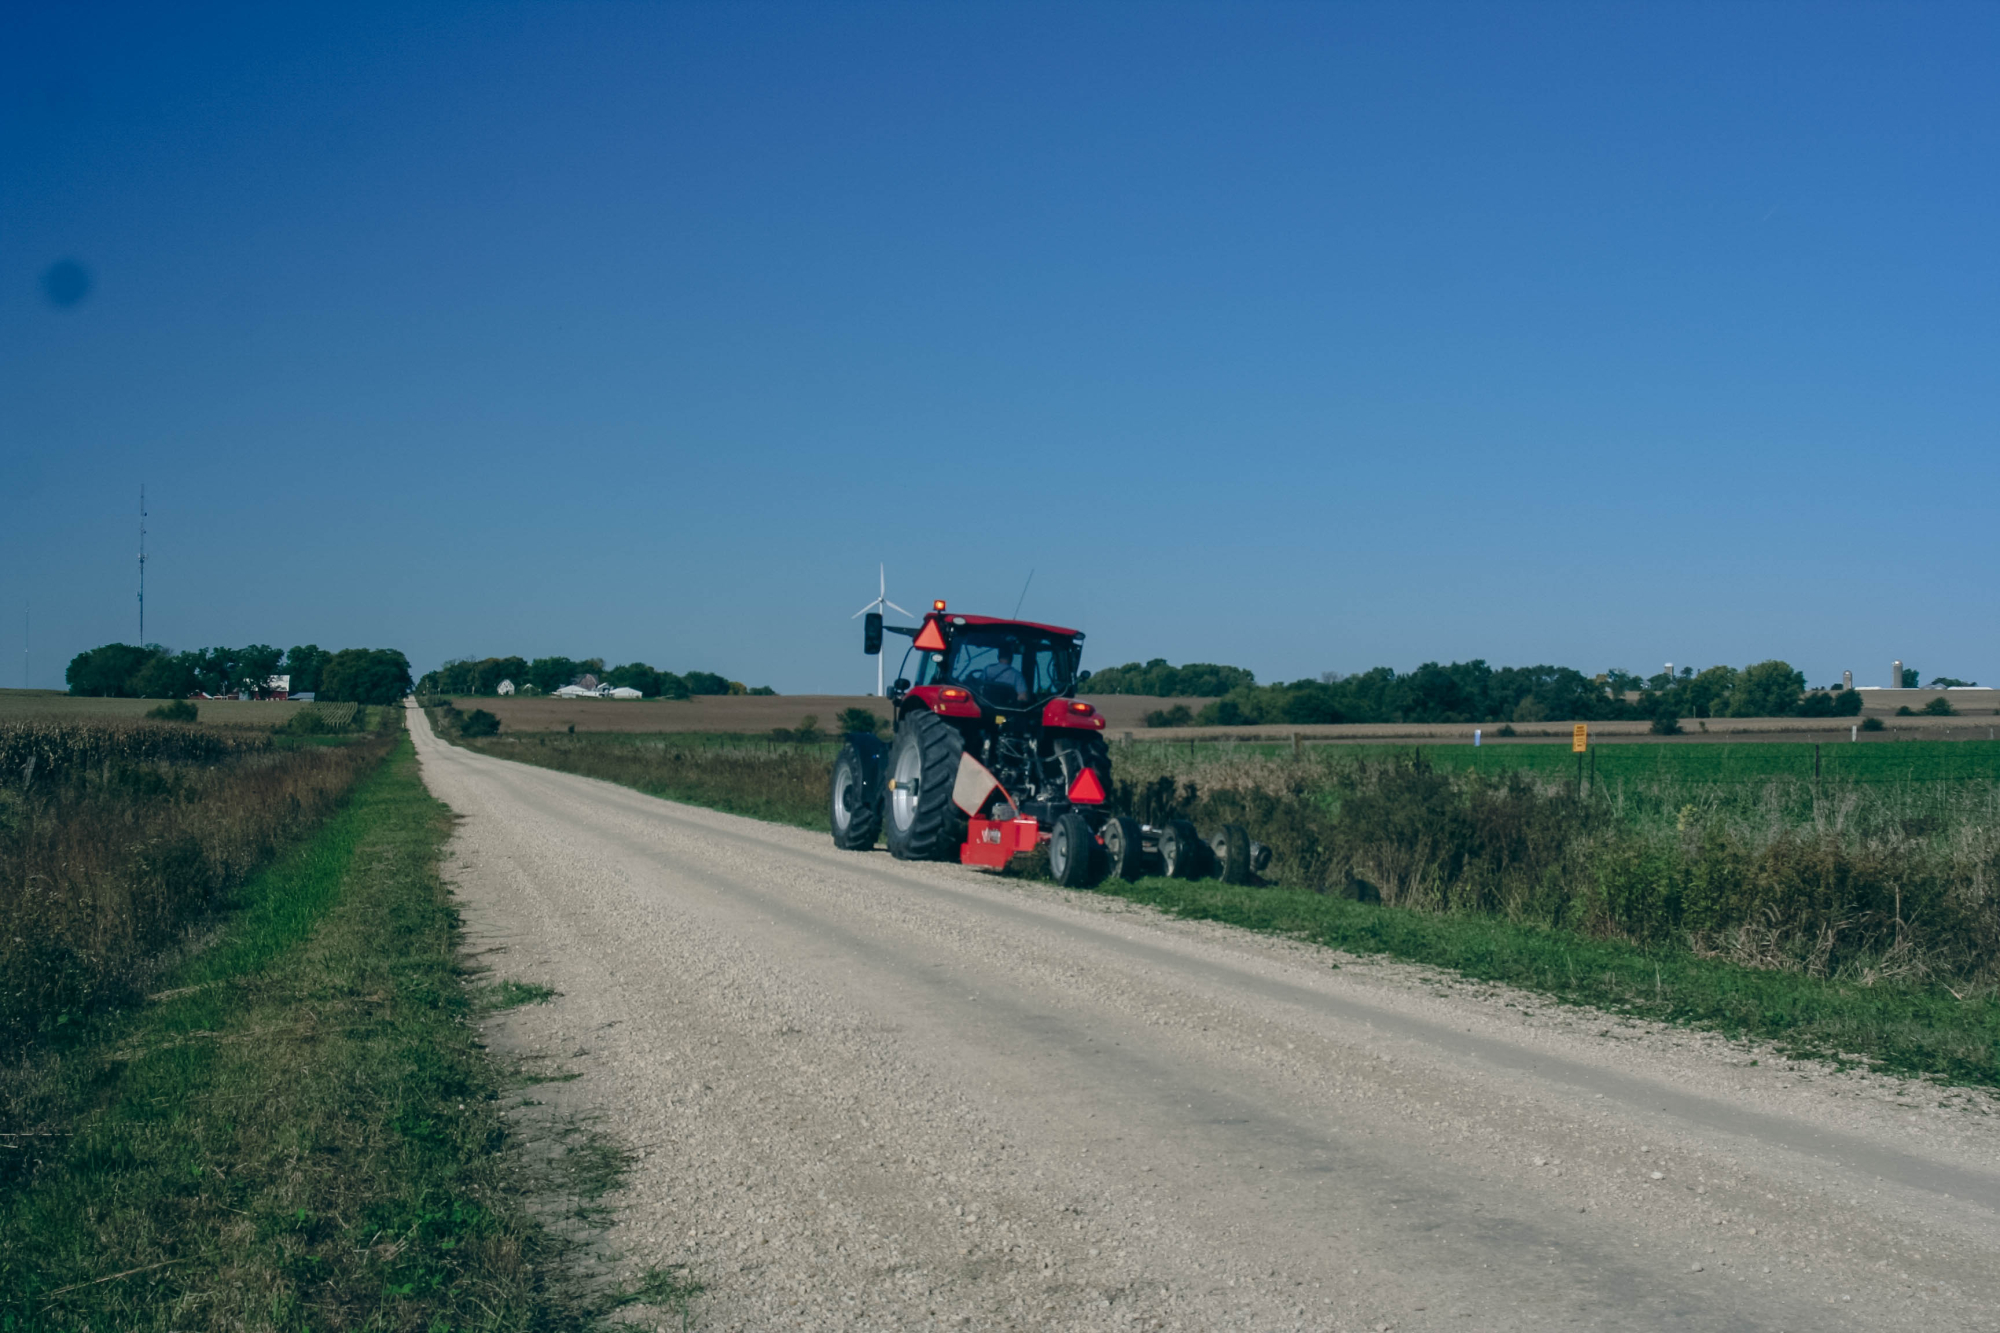 A tractor tends to roadside vegetation by a gravel road on a cloudless day.